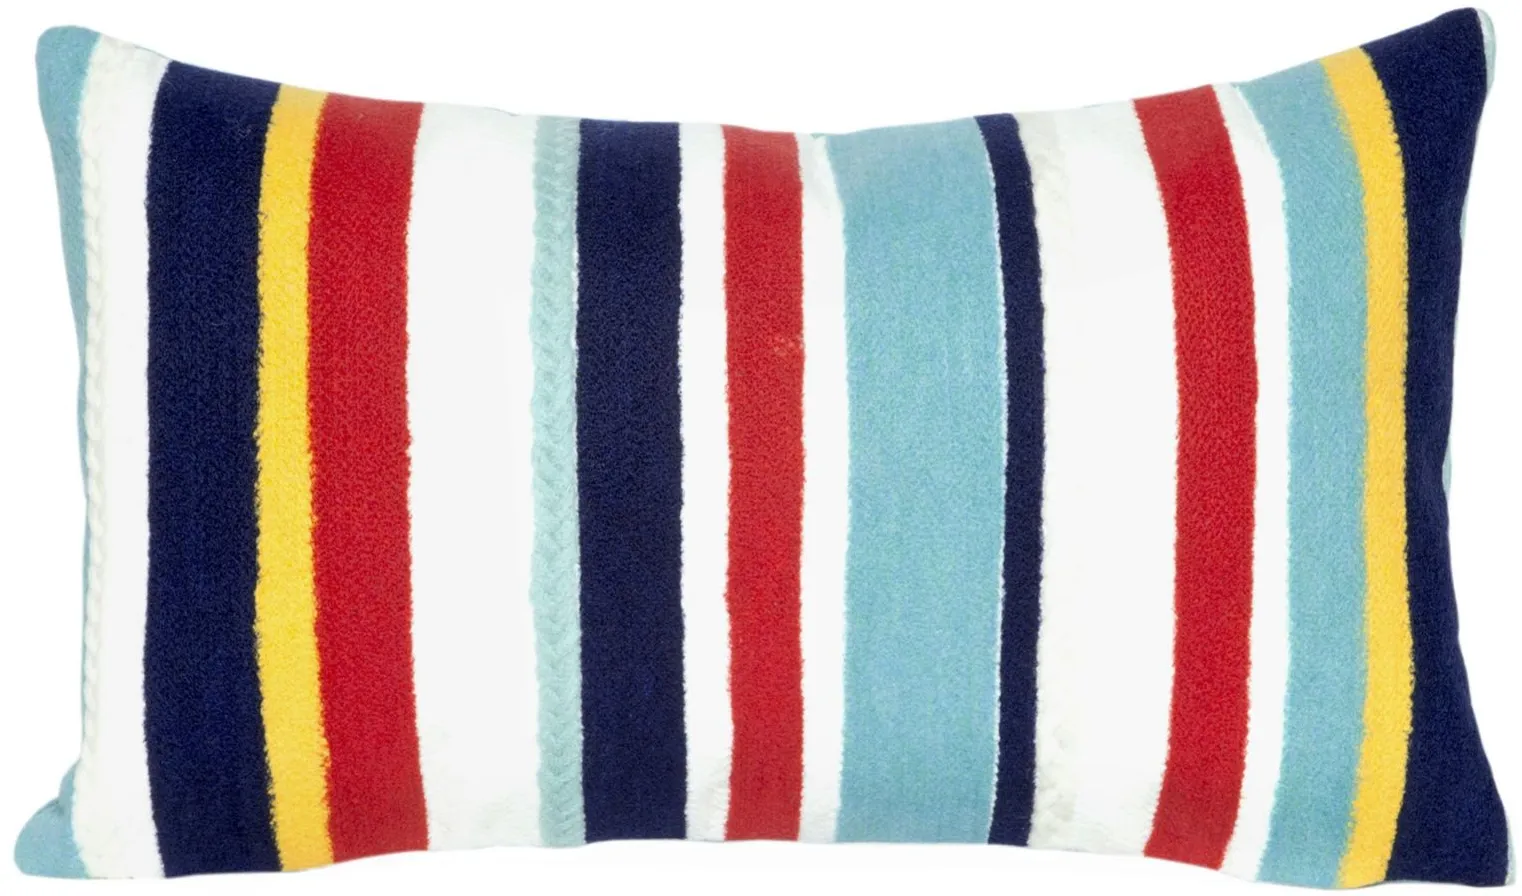 Liora Manne Visions III Riviera Pillow in Multi by Trans-Ocean Import Co Inc